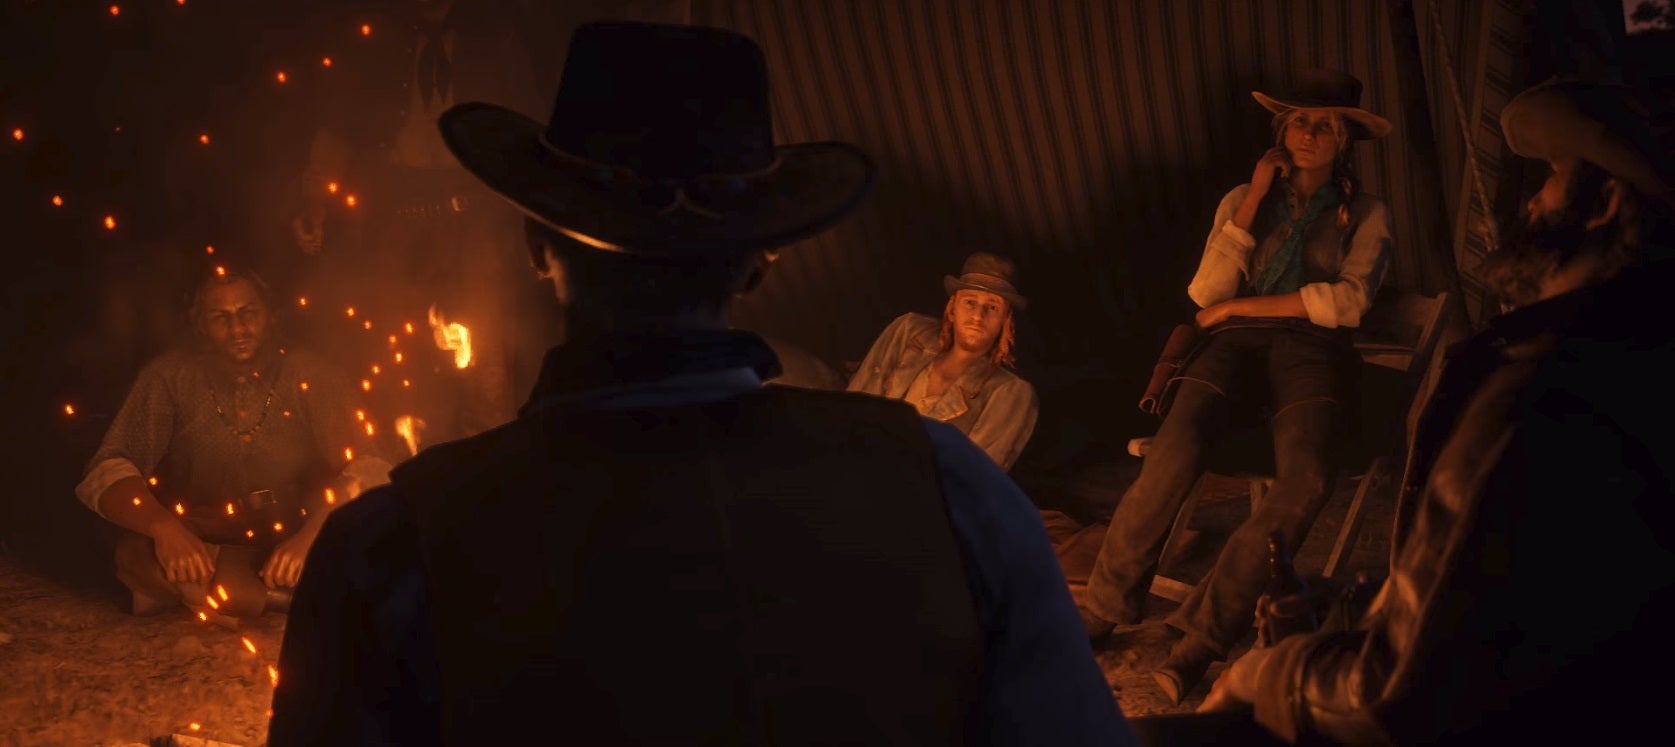 6 Takeaways From the New Red Dead Trailer | VG247